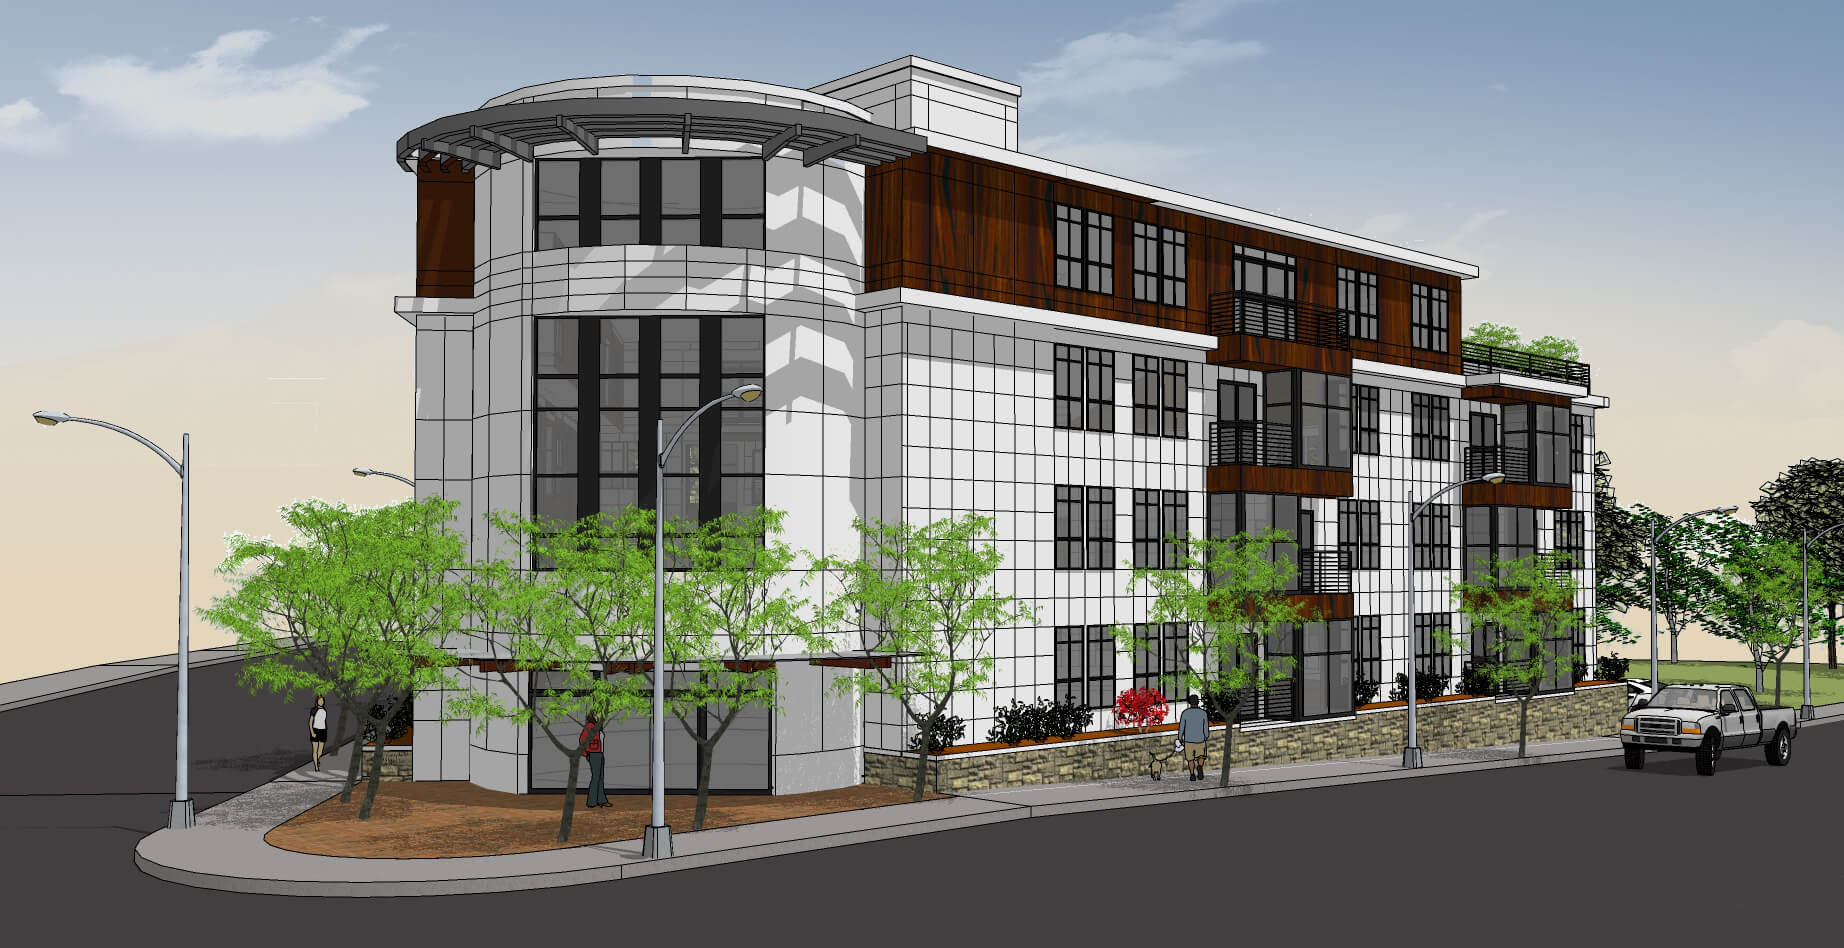 CONGRESS NAMED CONSTRUCTION MANAGER FOR MULTI-FAMILY PROJECT RESIDENCES AT 400 BELGRADE AVE., WEST ROXBURY, MA